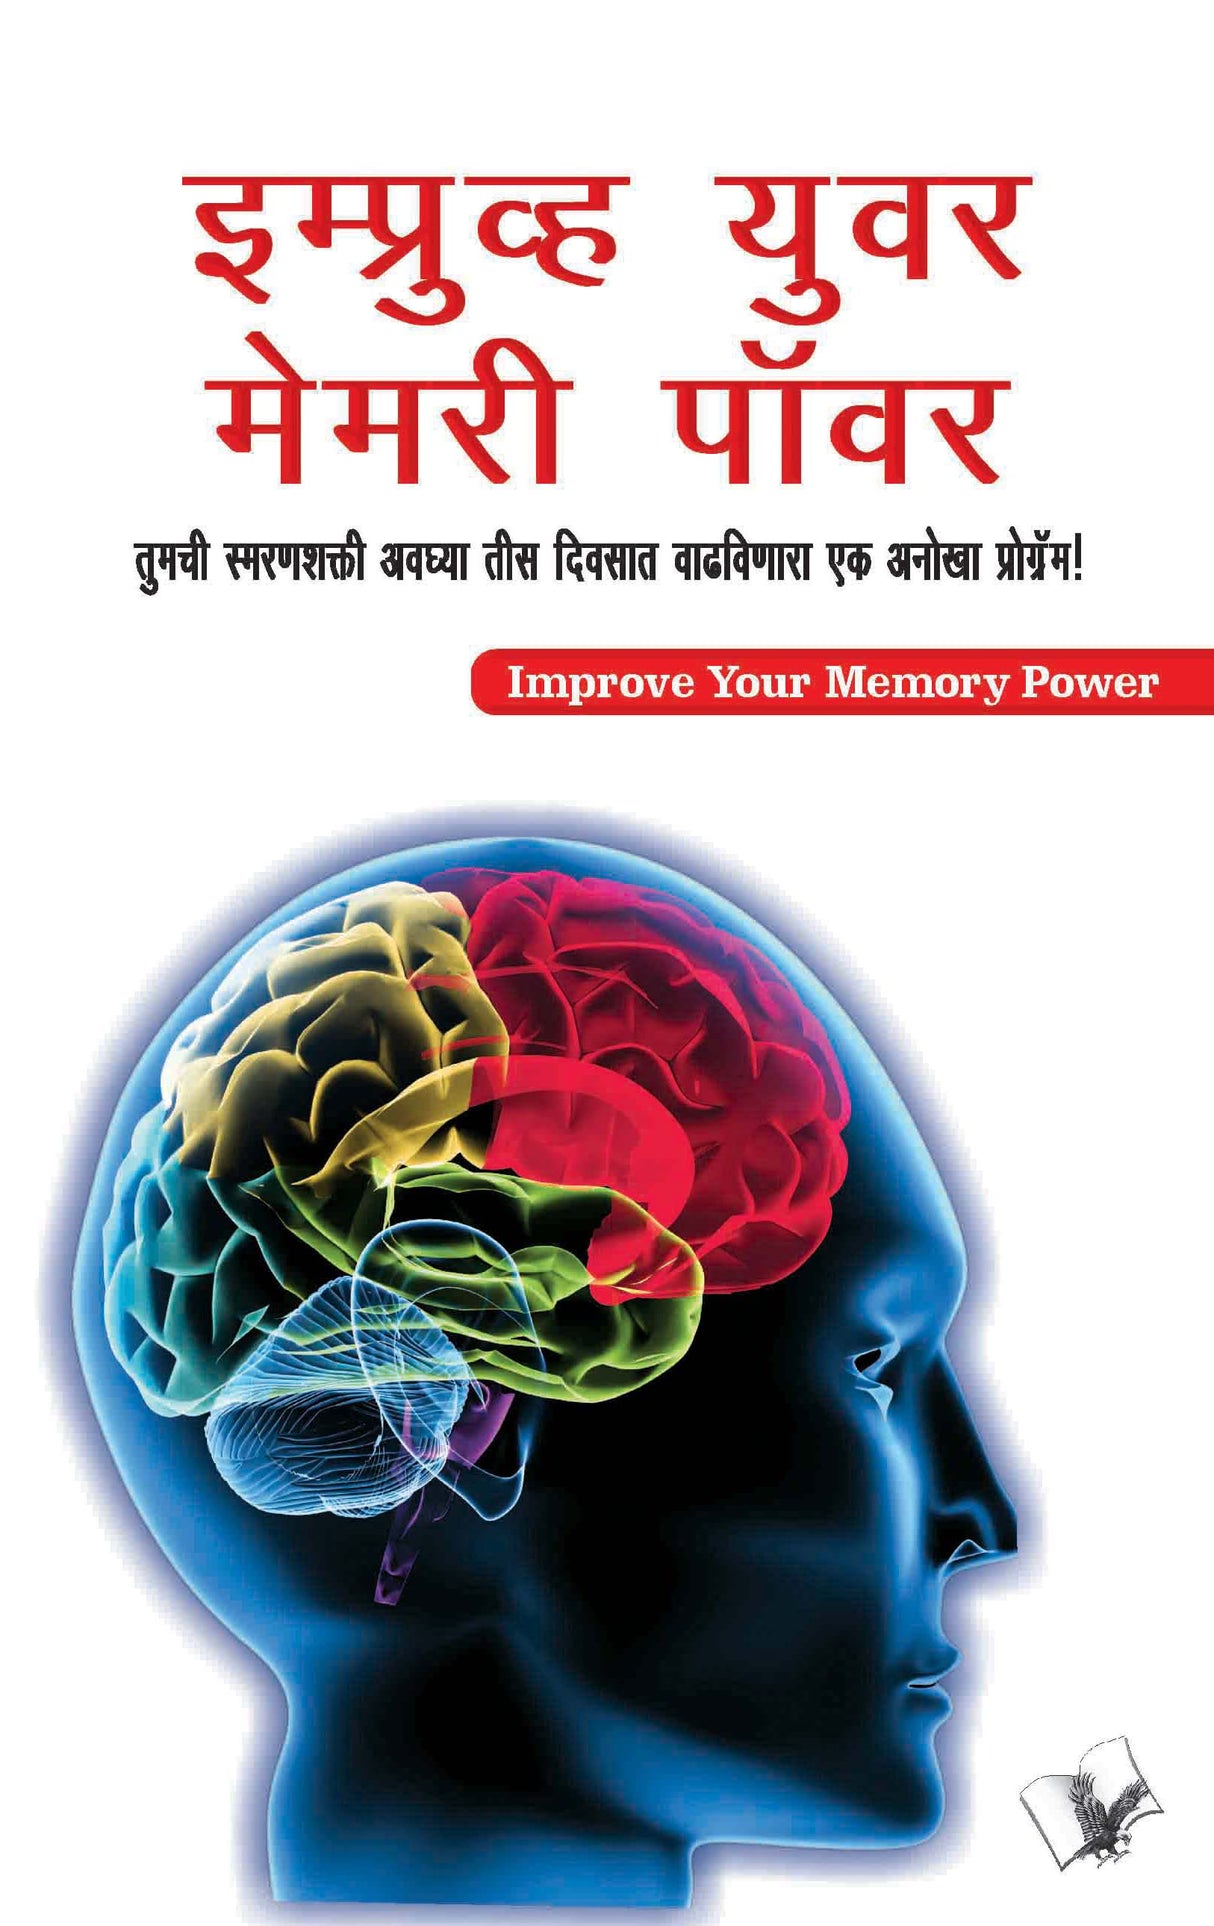 Improve Your Memory Power (Marathi): A simple and effective course to sharpen your memory in 30 days in Marathi